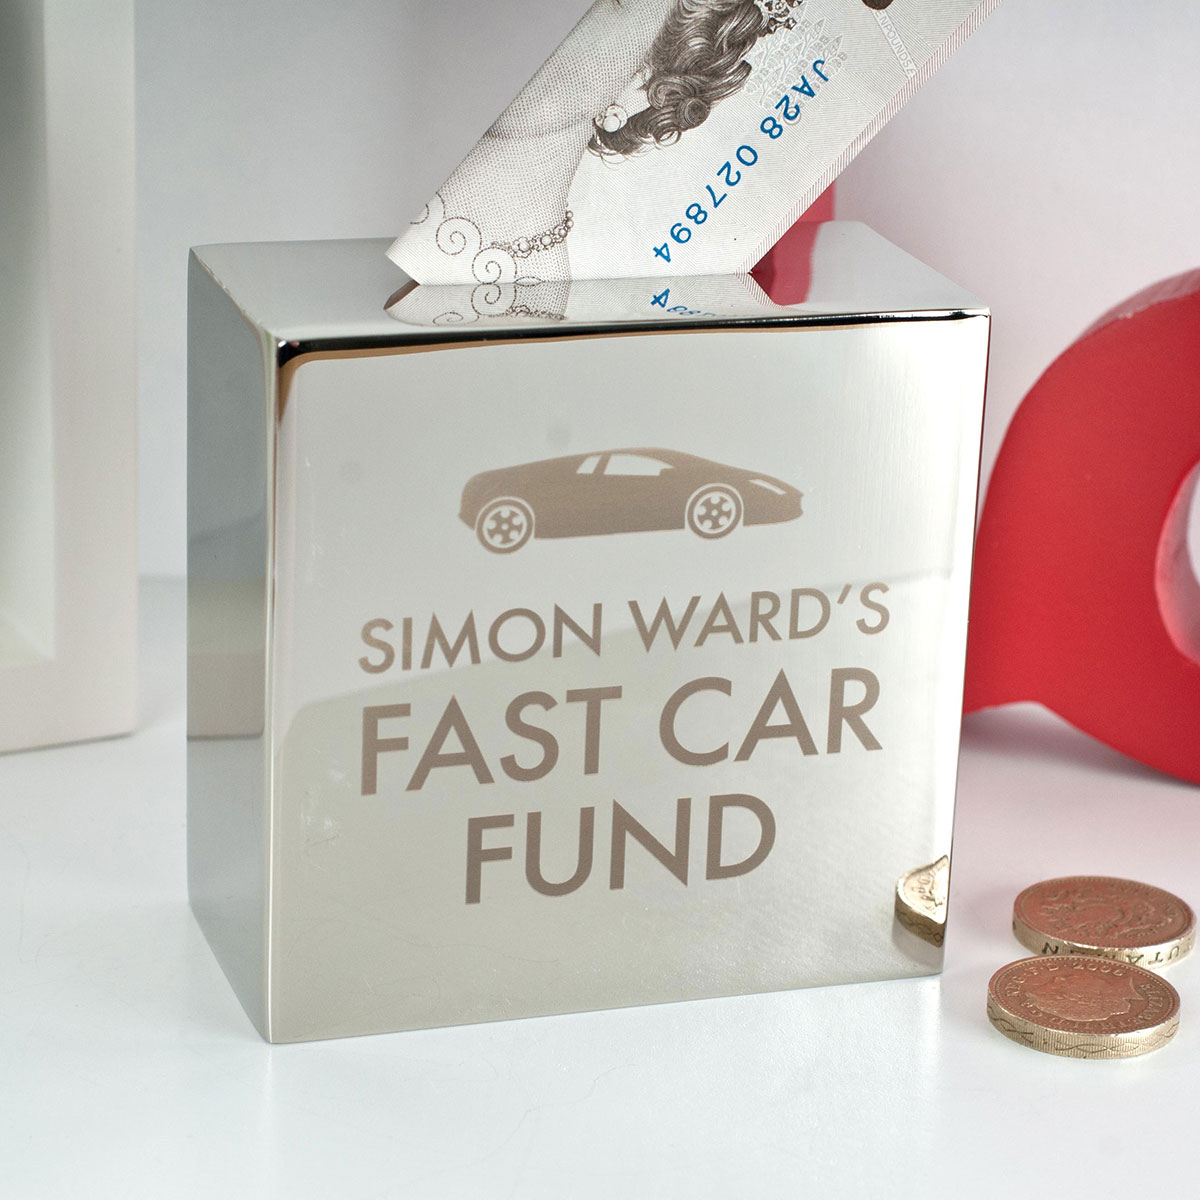 Personalised Silver Money Box - Fast Car Fund